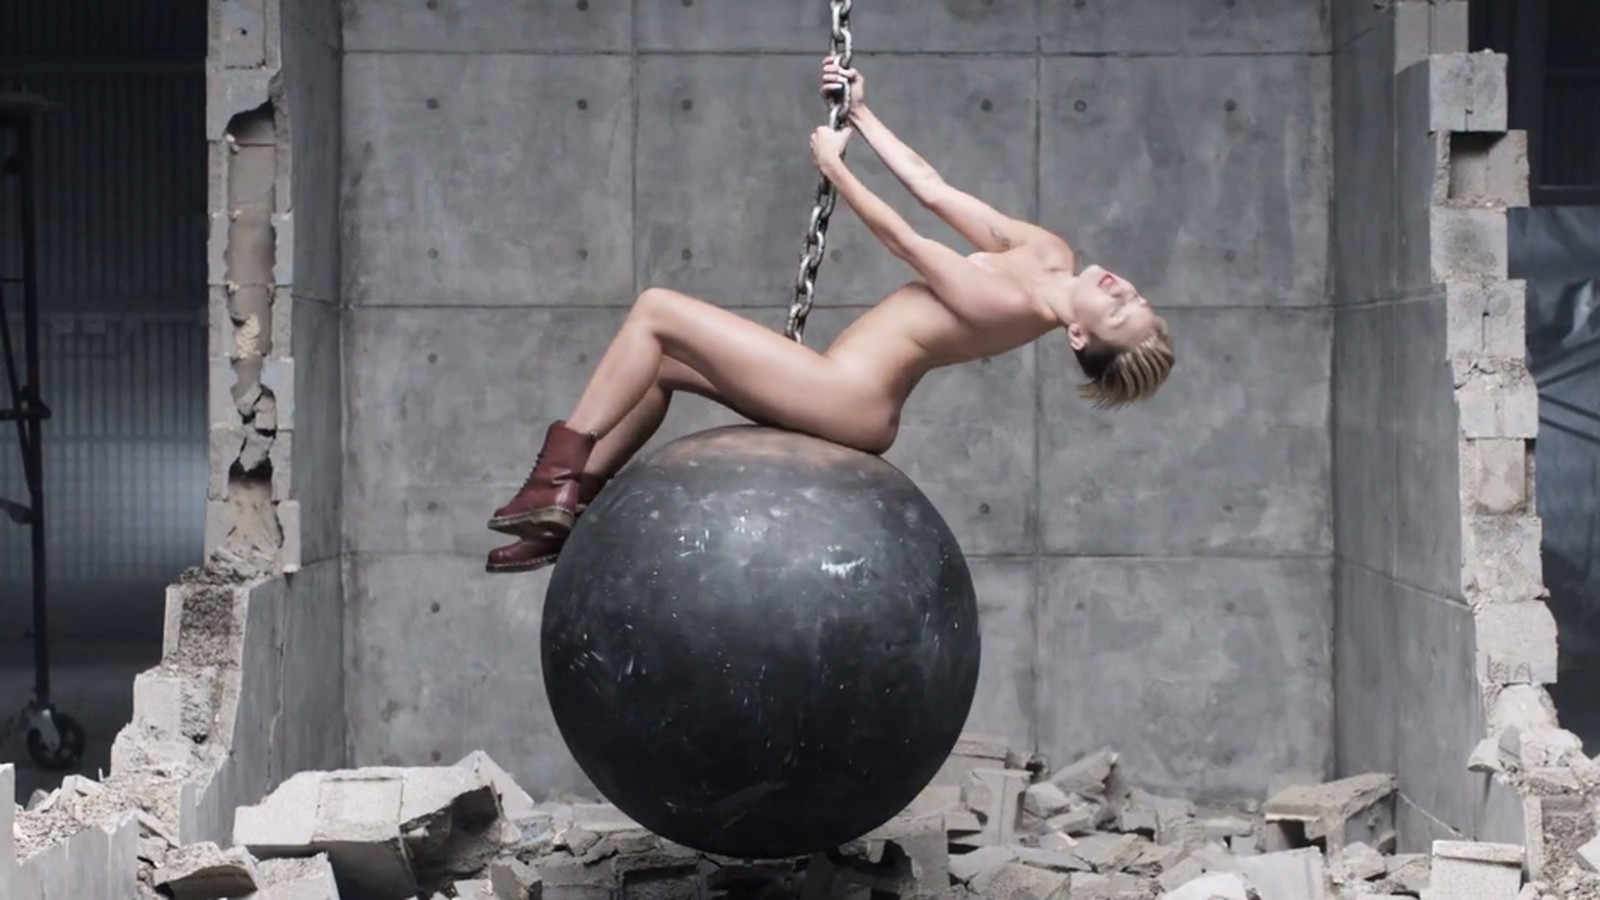 Miley Cyrus Explores New Ways to Be Naked in Latest Video.